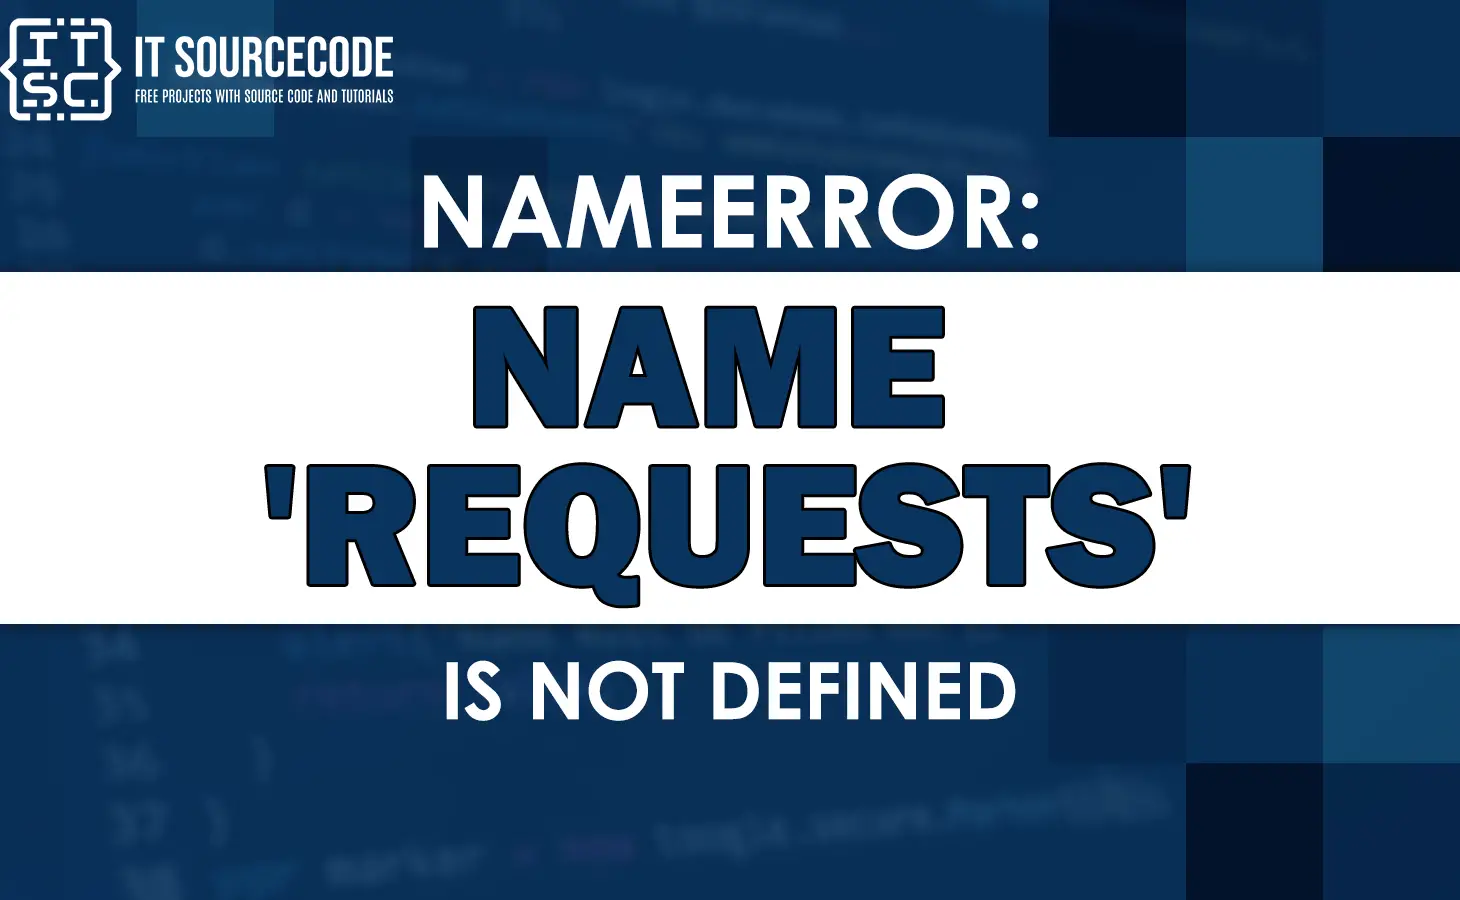 Nameerror: name requests is not defined